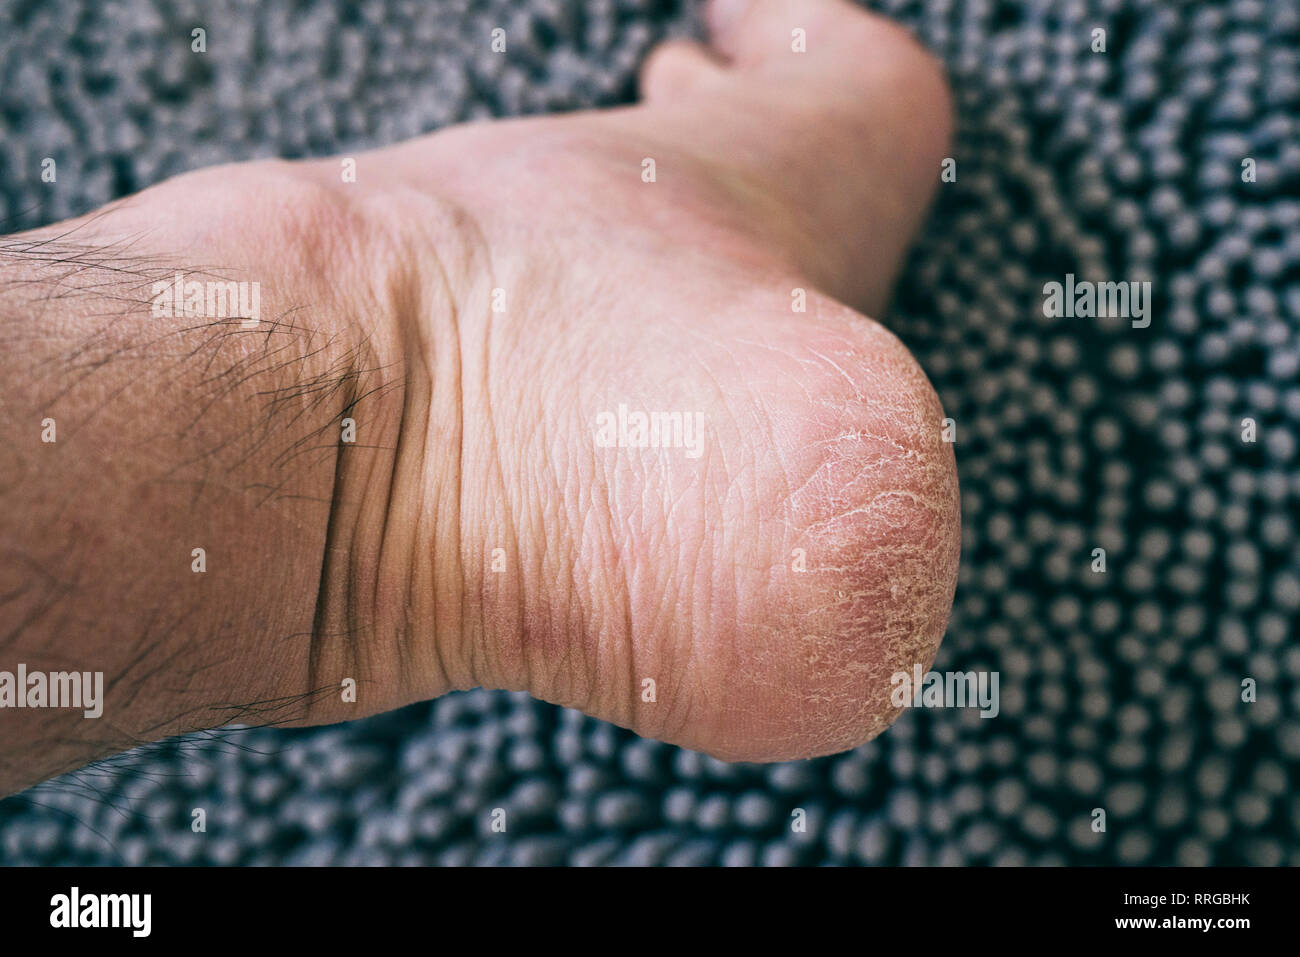 Dry and cracked skin on the heel of a Caucasian man Stock Photo